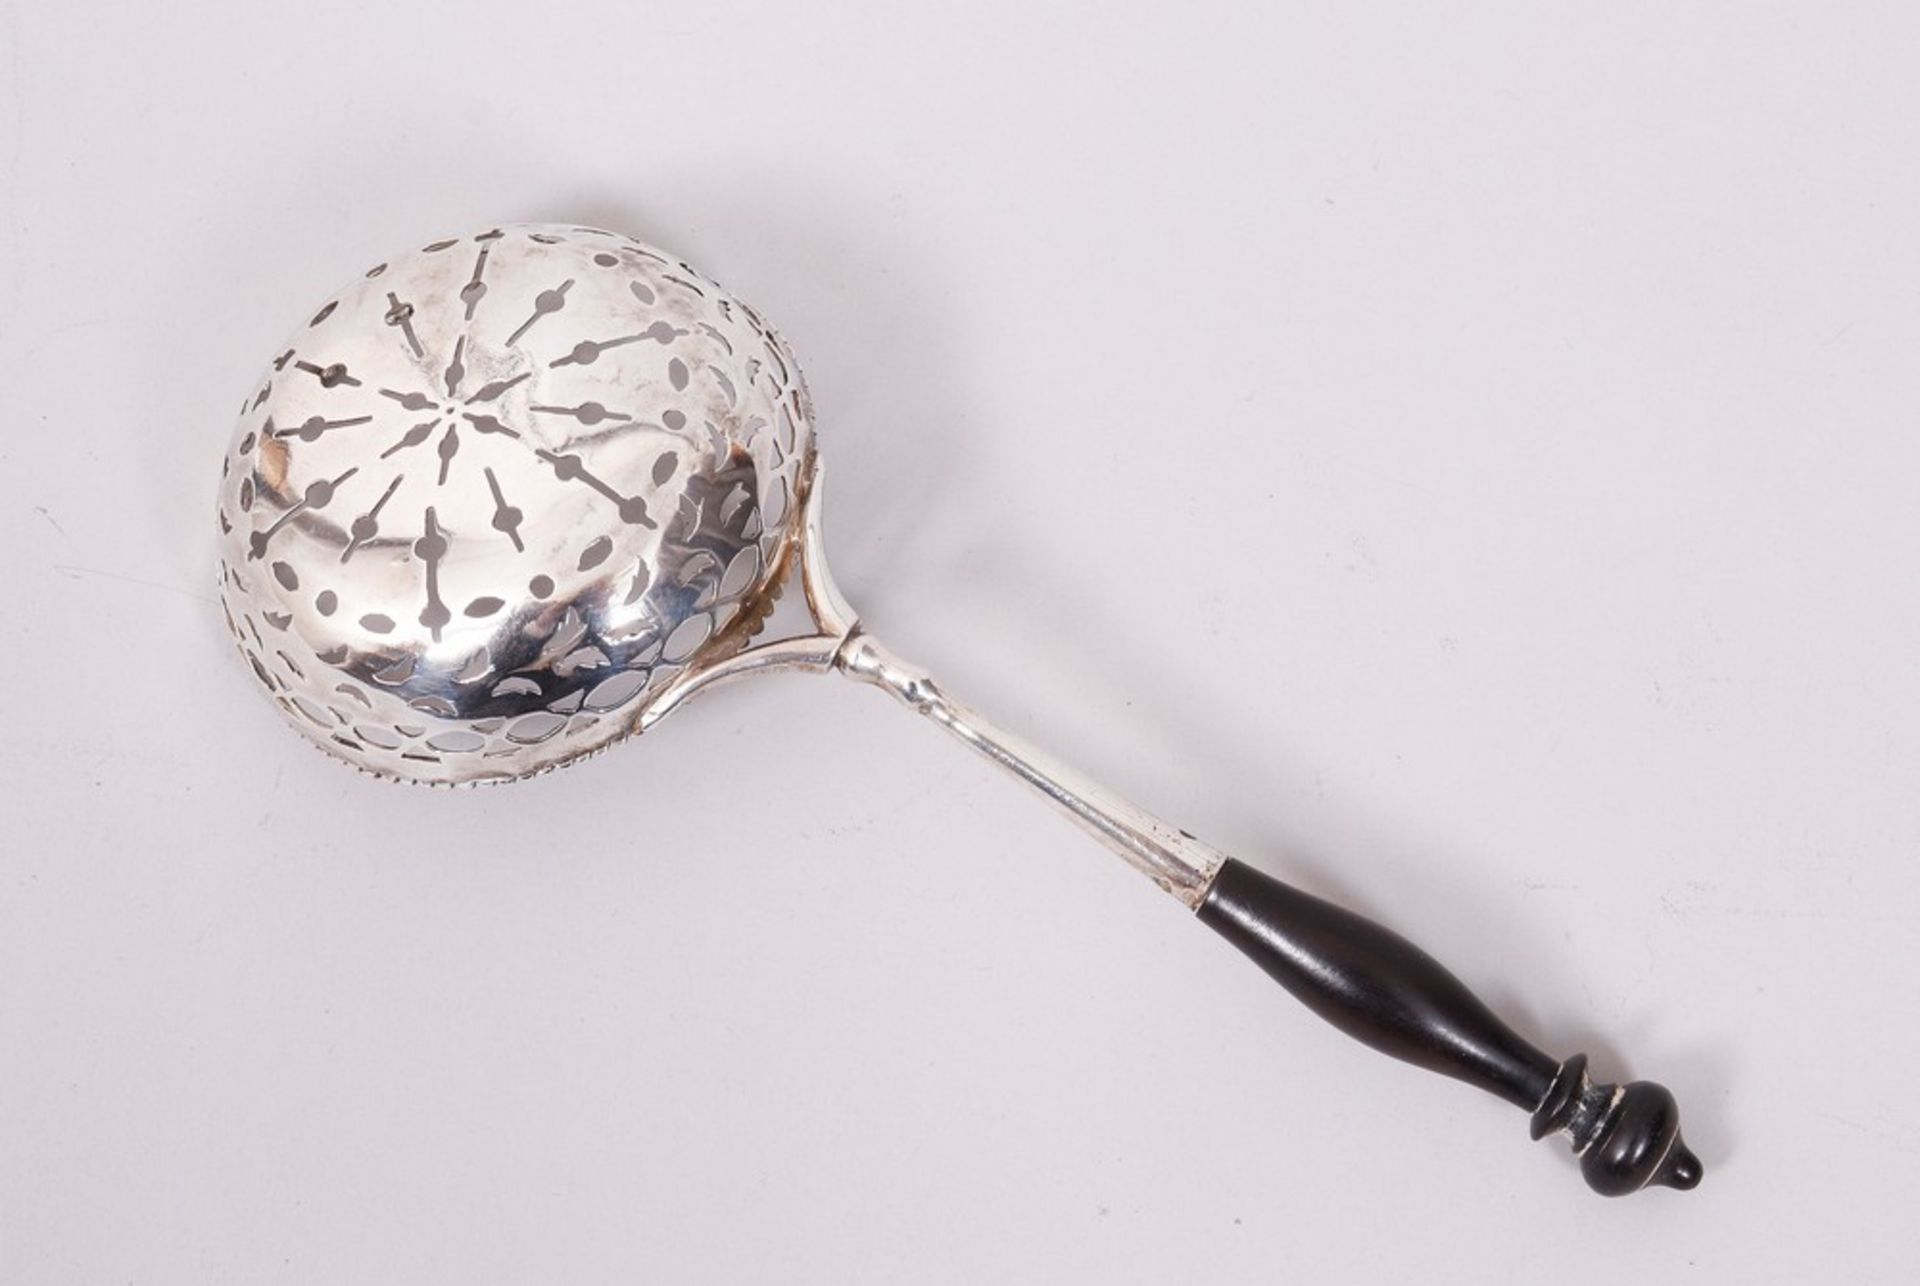 Biedermeier sifting spoon, silver, probably German, 1st half of the 19th C. - Image 2 of 3